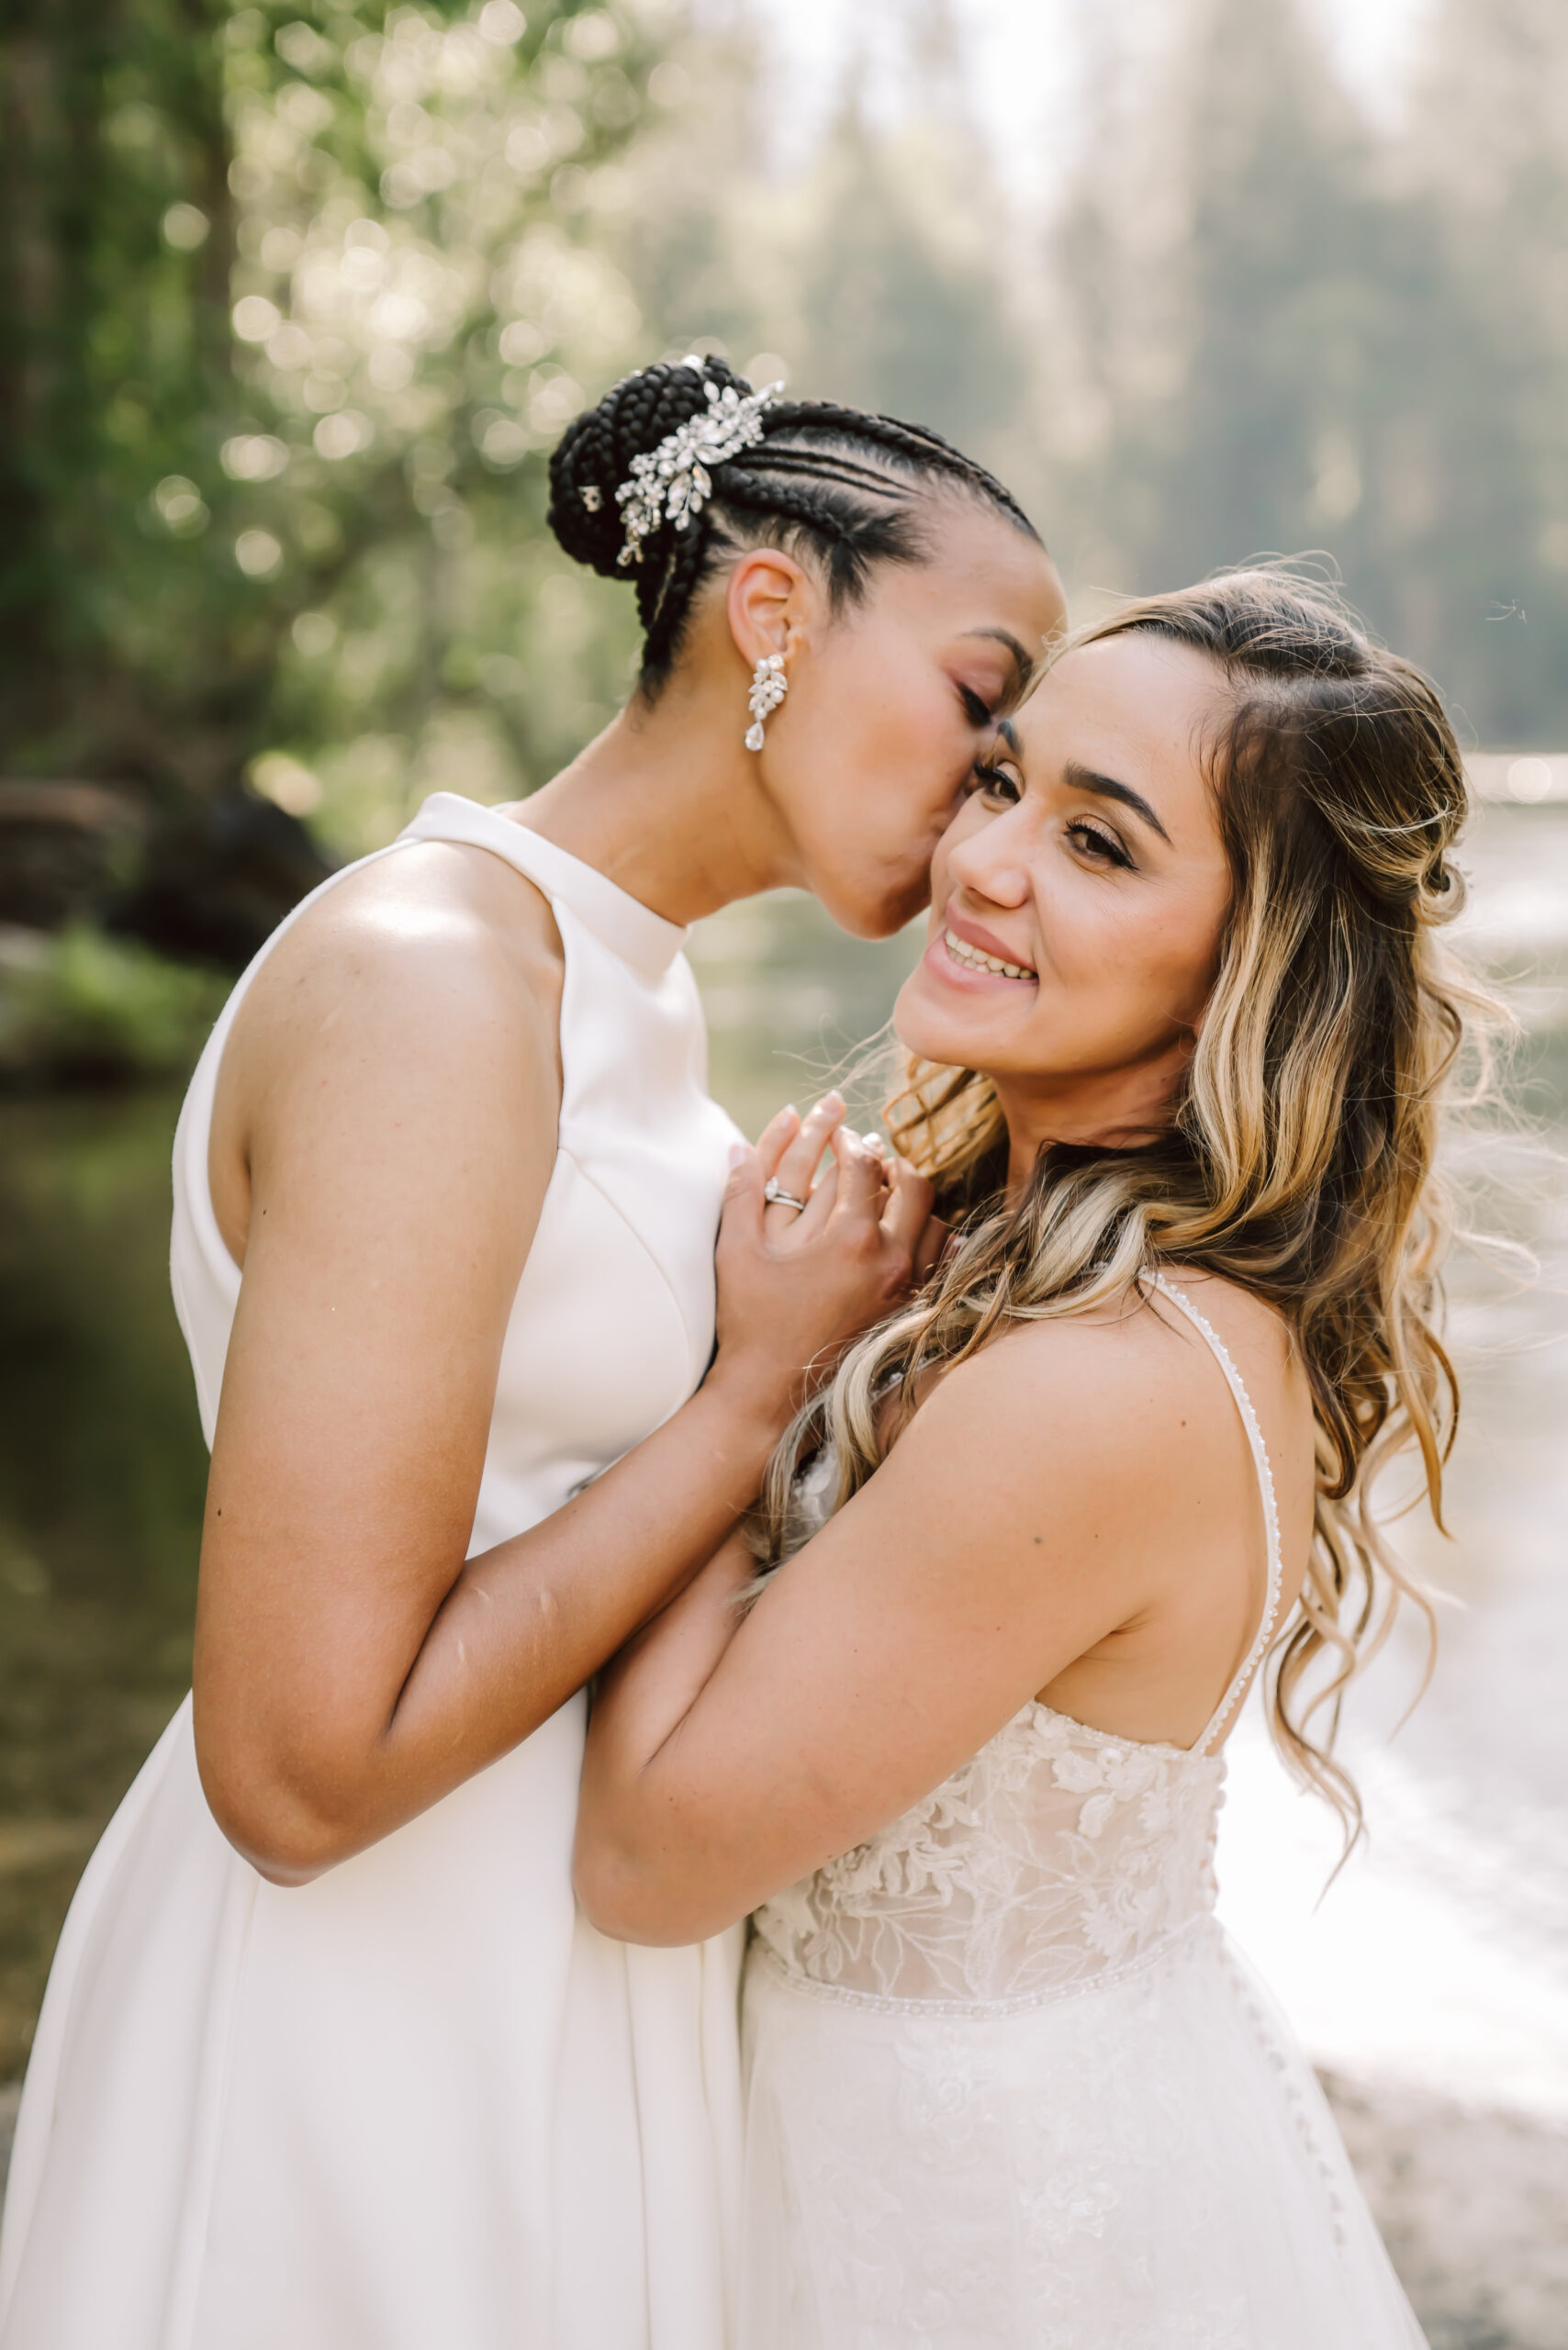 one bride kissing her other bride and holding hand on their Elopement day